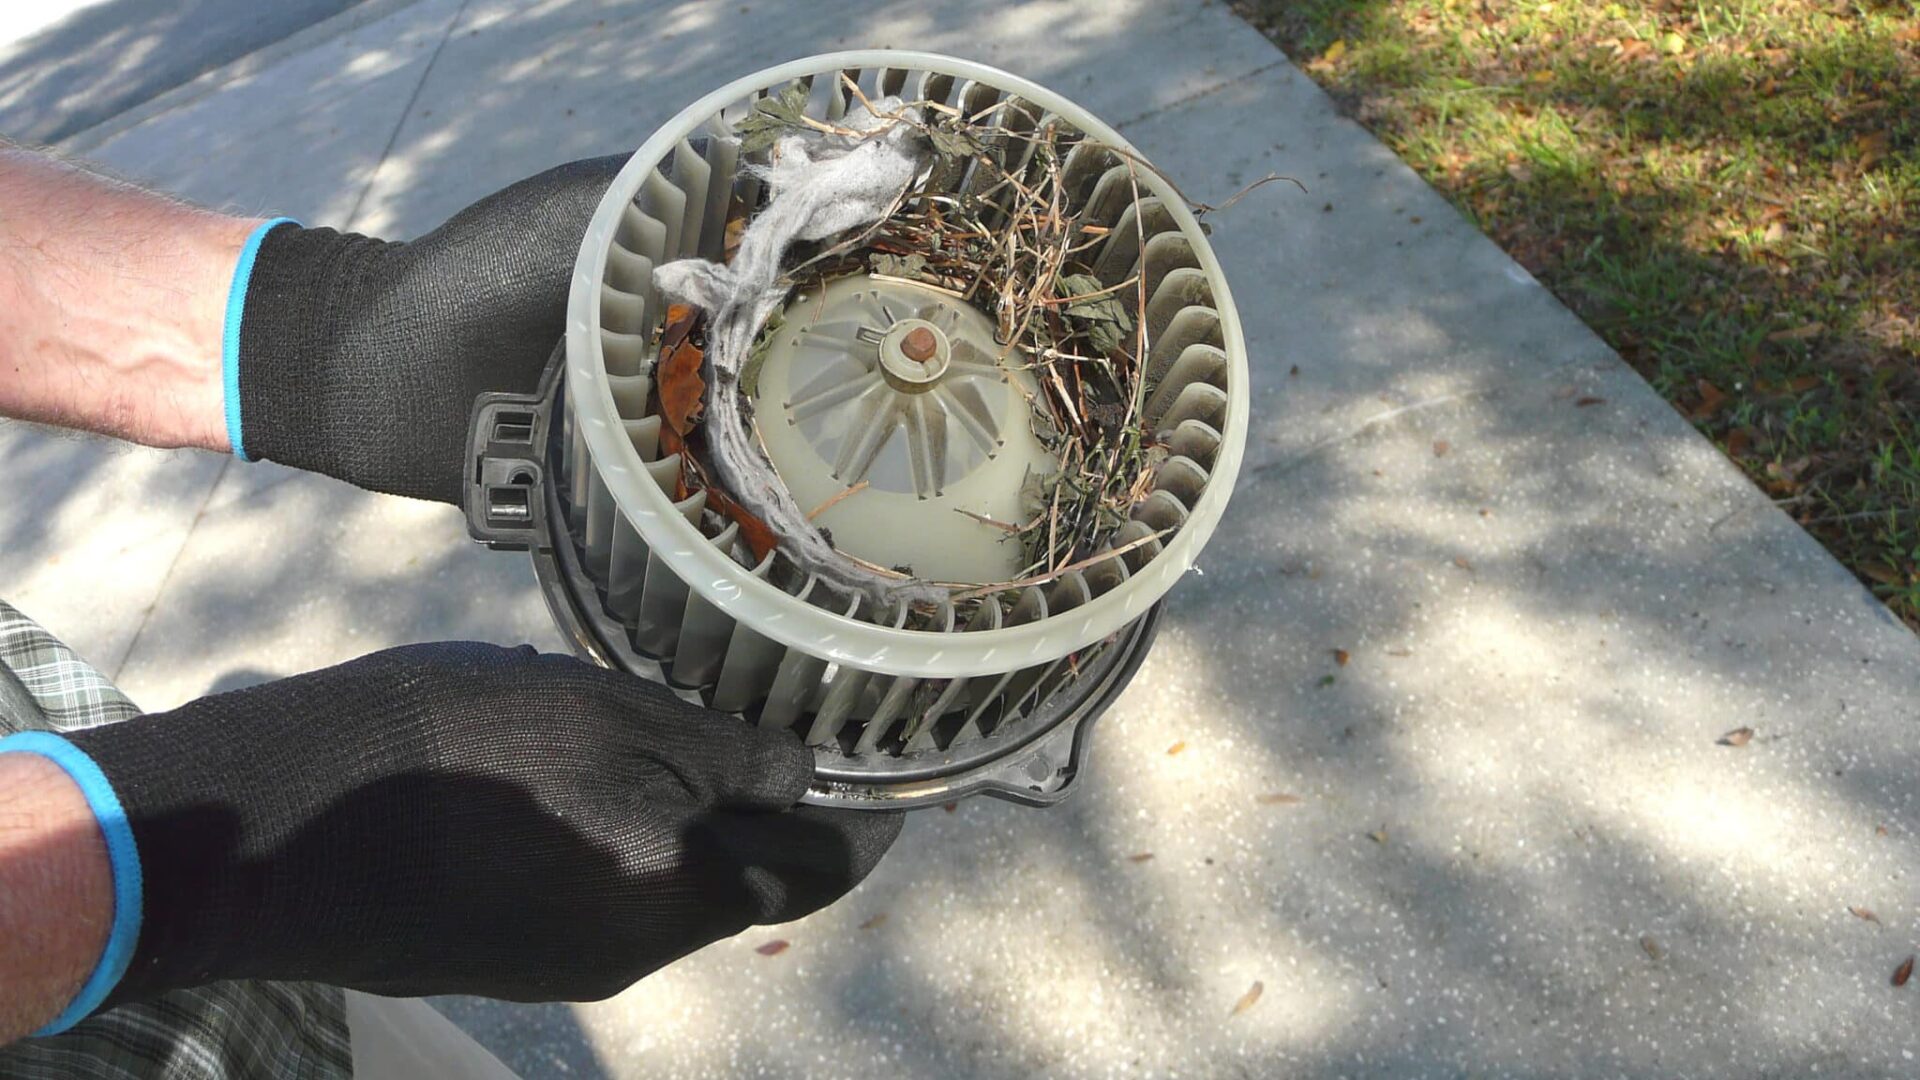 A car owner is preparing to clean out a mouse nest in the fan blower motor cage, also known as a squirrel cage. It was lined with a dryer sheet, leaves, and twigs.